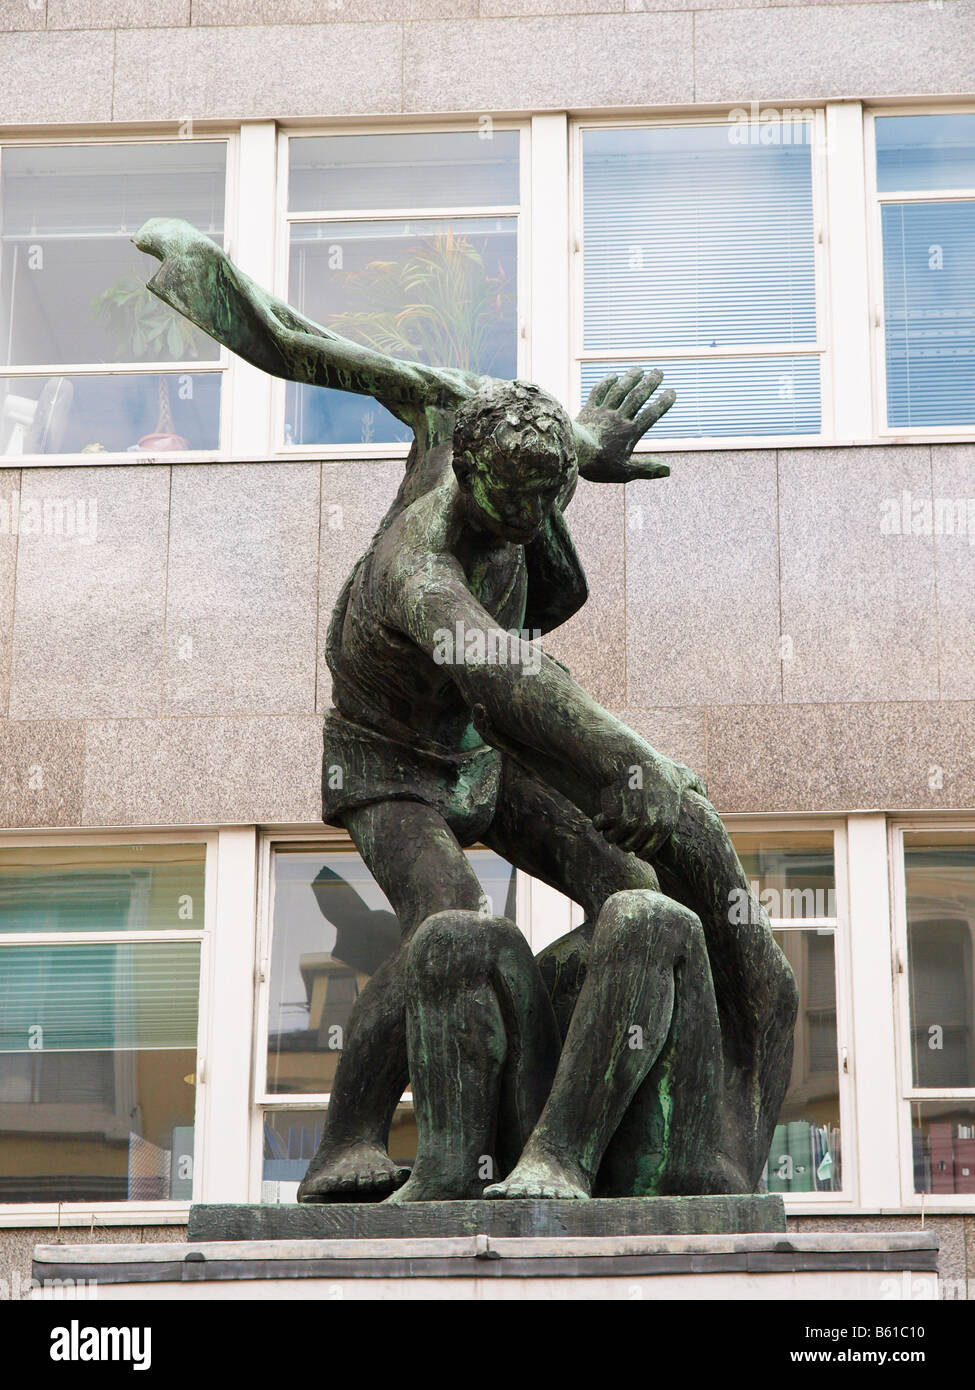 Trades Union headquarters building with bronze sculpture by Bernard Meadows representing the spirit of trade unionism. Stock Photo